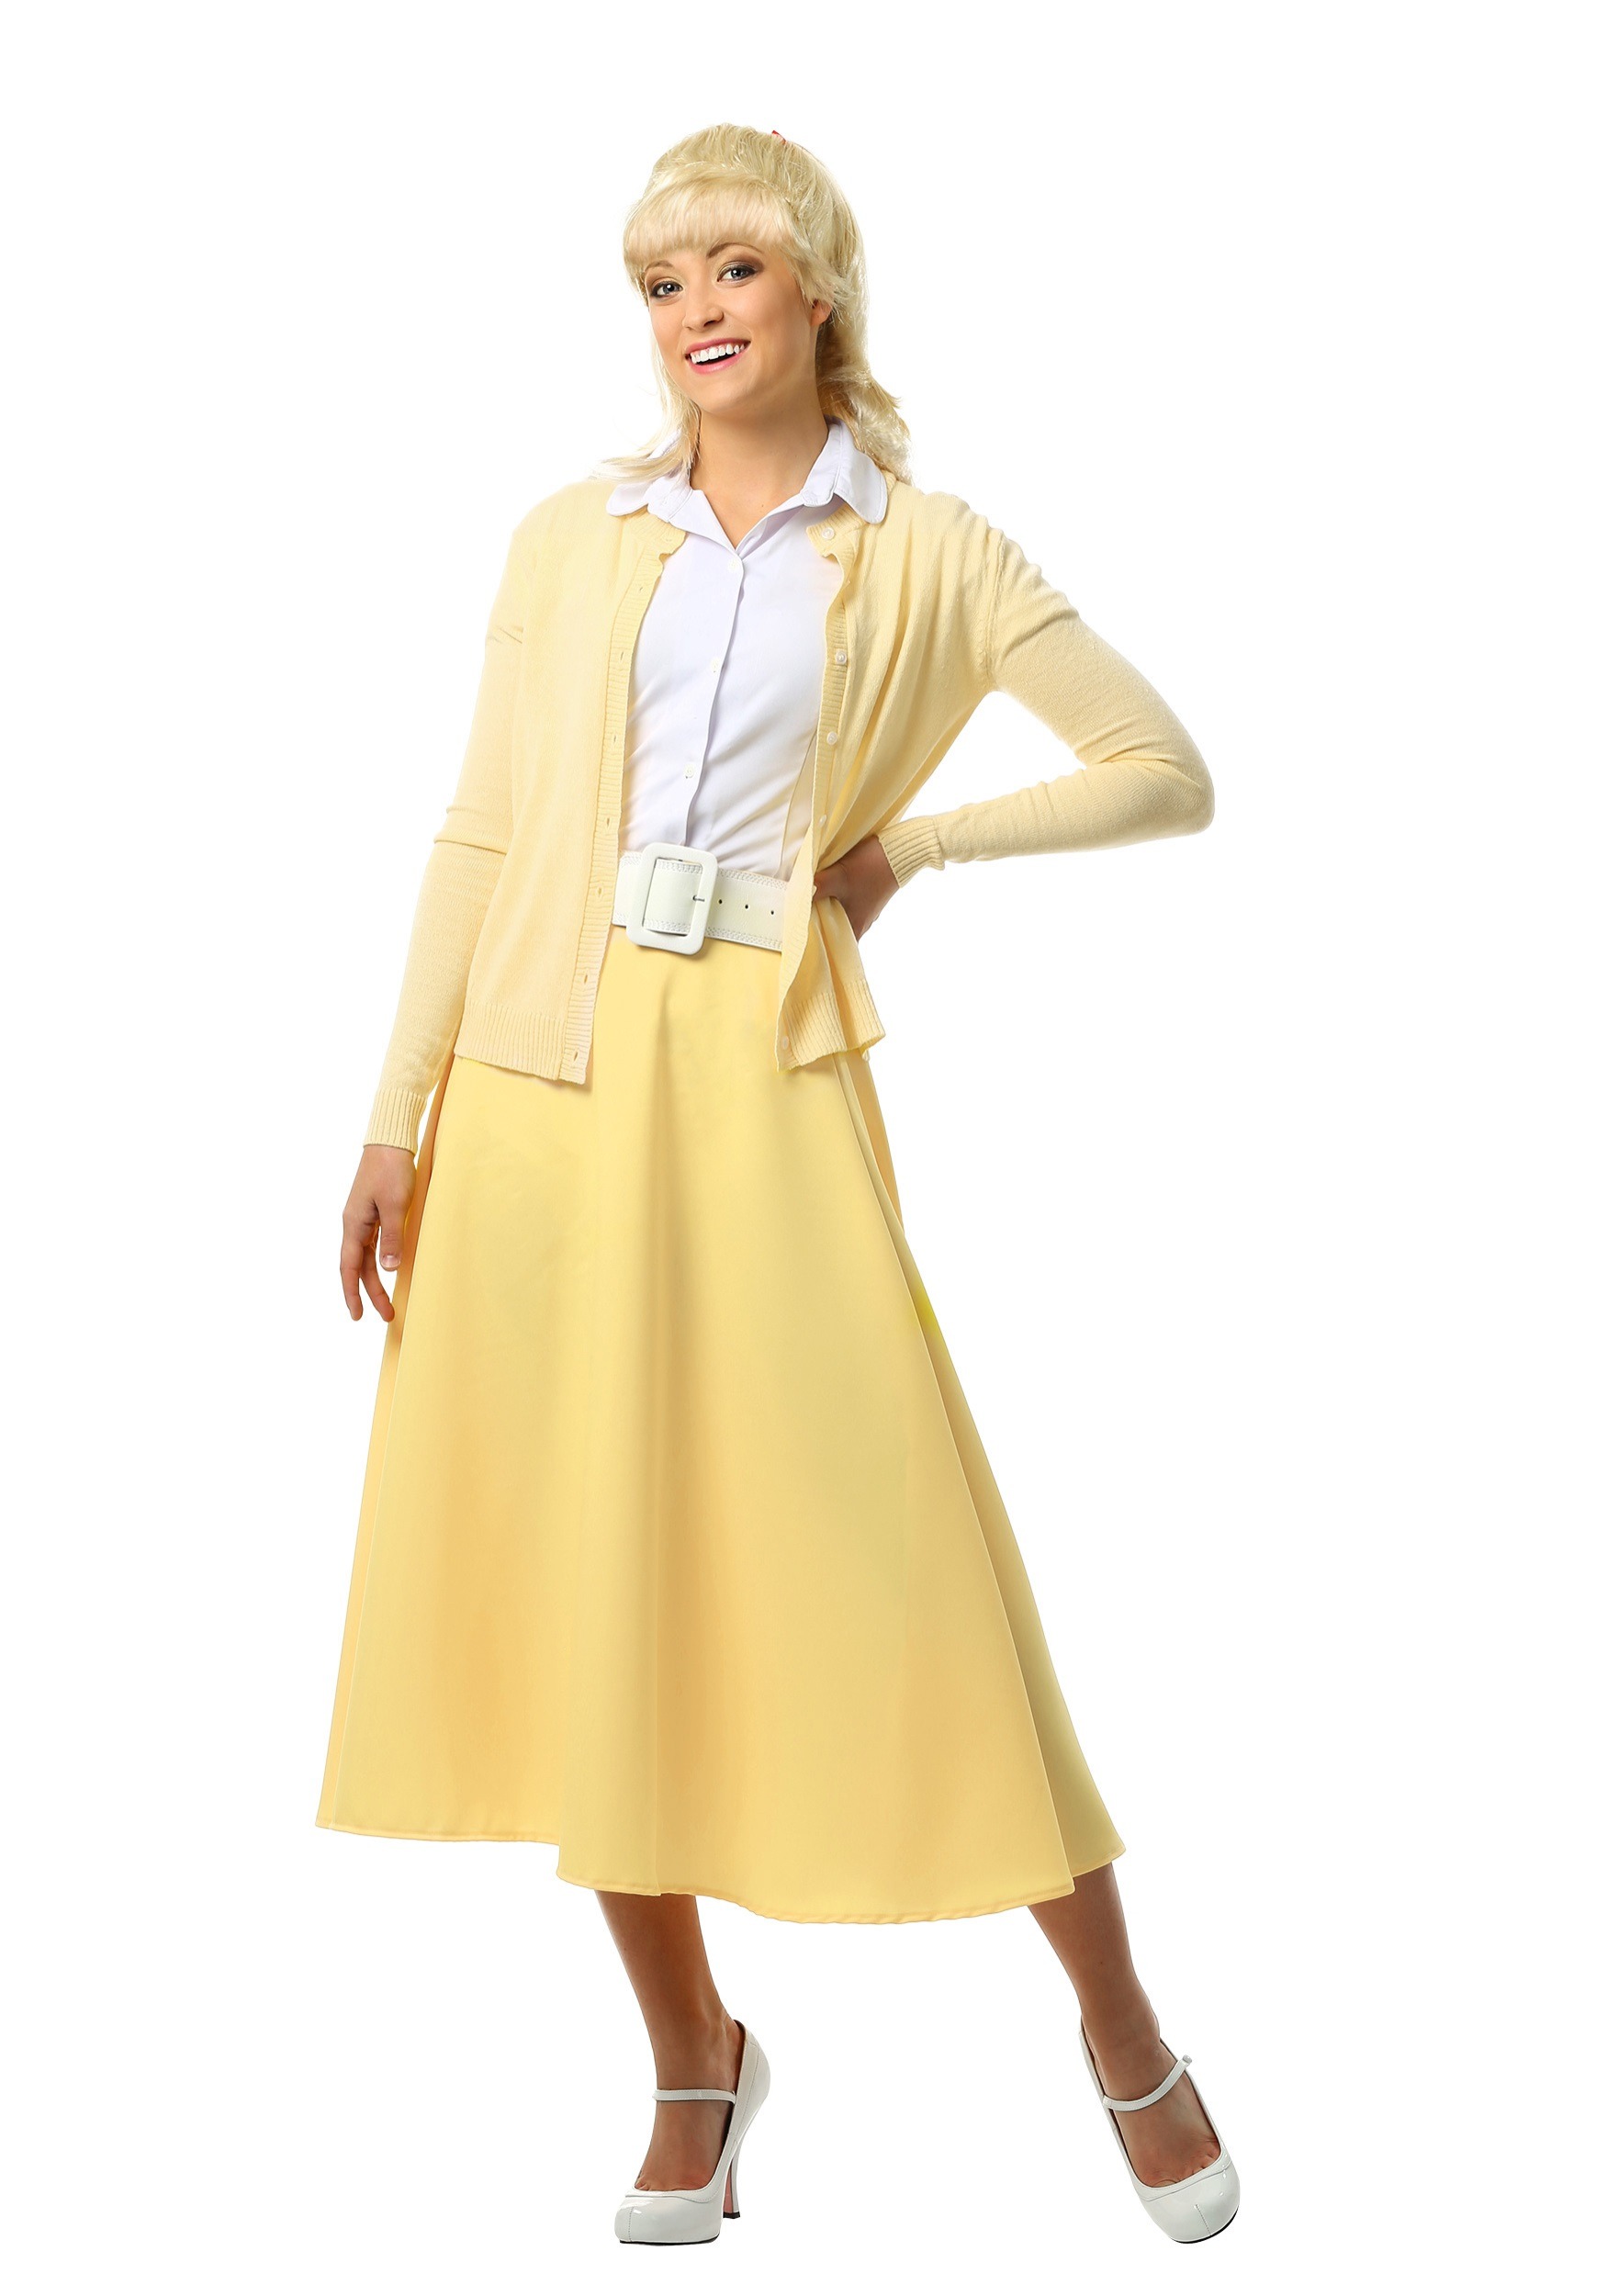 50s Costumes | 50s Halloween Costumes Grease Good Sandy Womens Costume Dress $79.99 AT vintagedancer.com